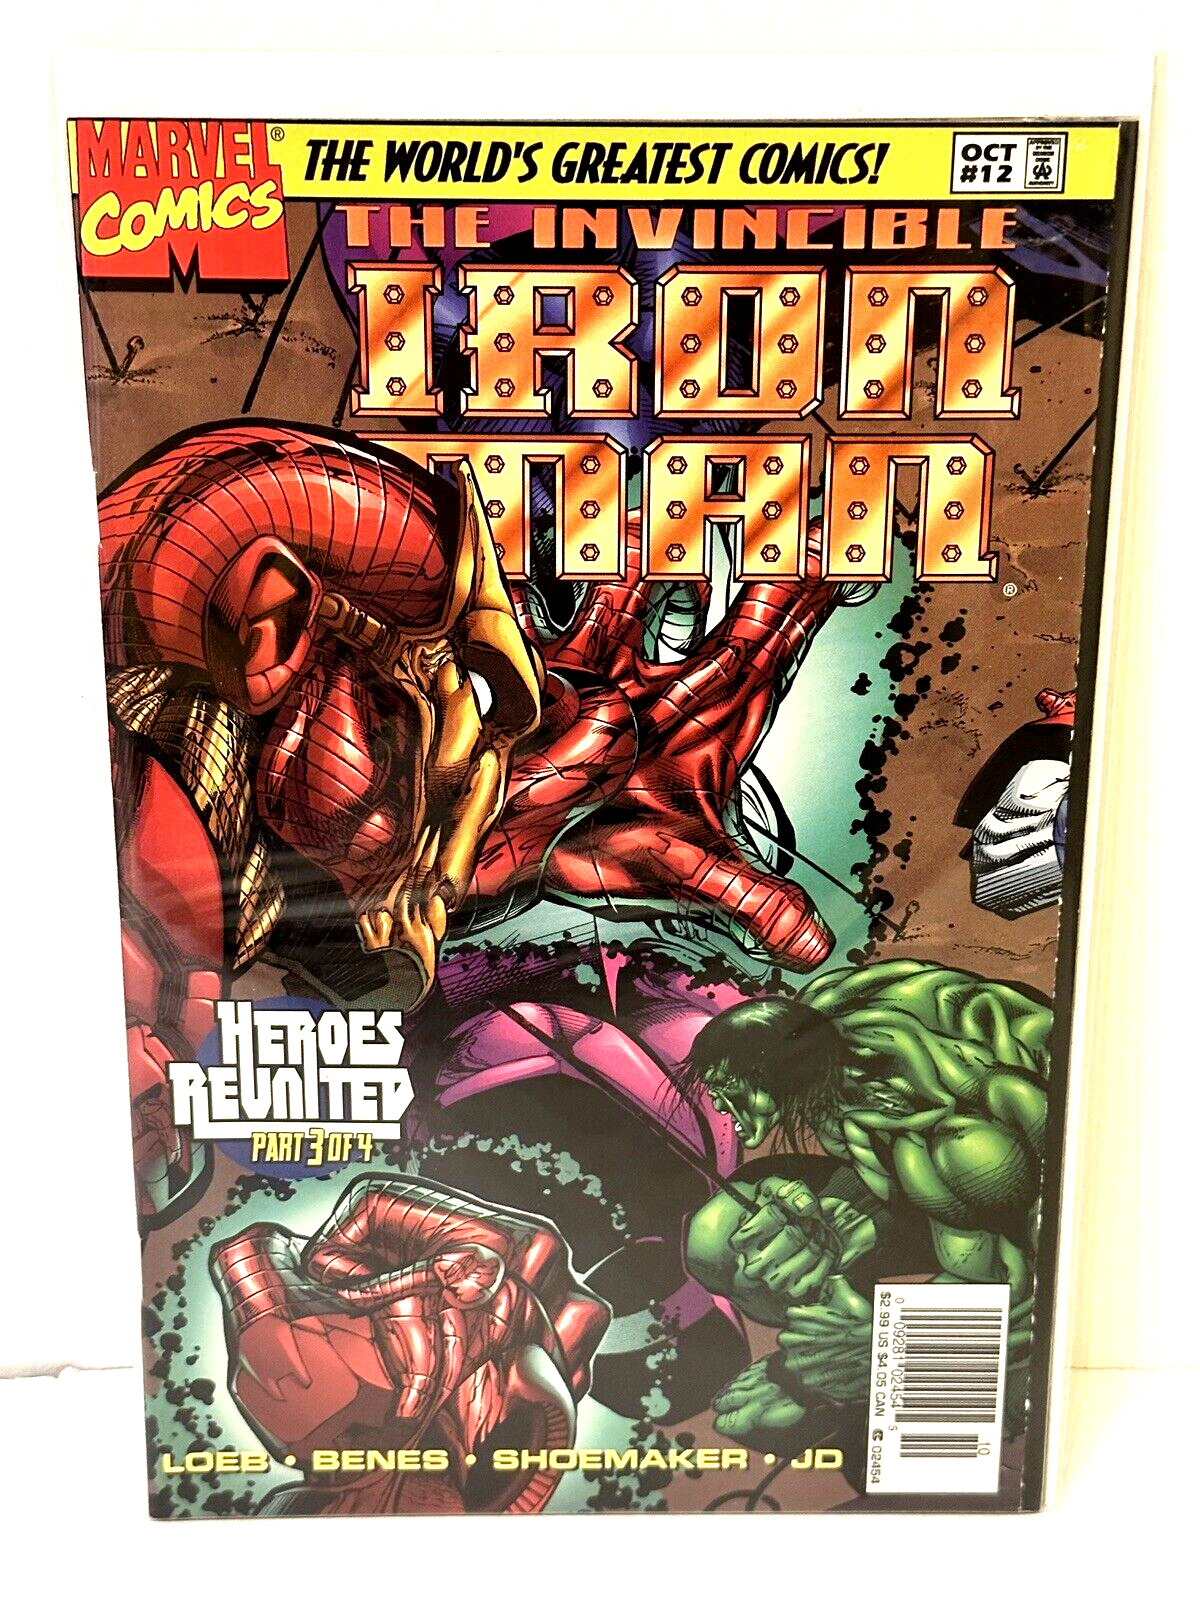 THE INVINCIBLE IRON MAN #12 OCT 1997 MARVEL HEROES REUNITED Part 3 COMIC ~ NEW